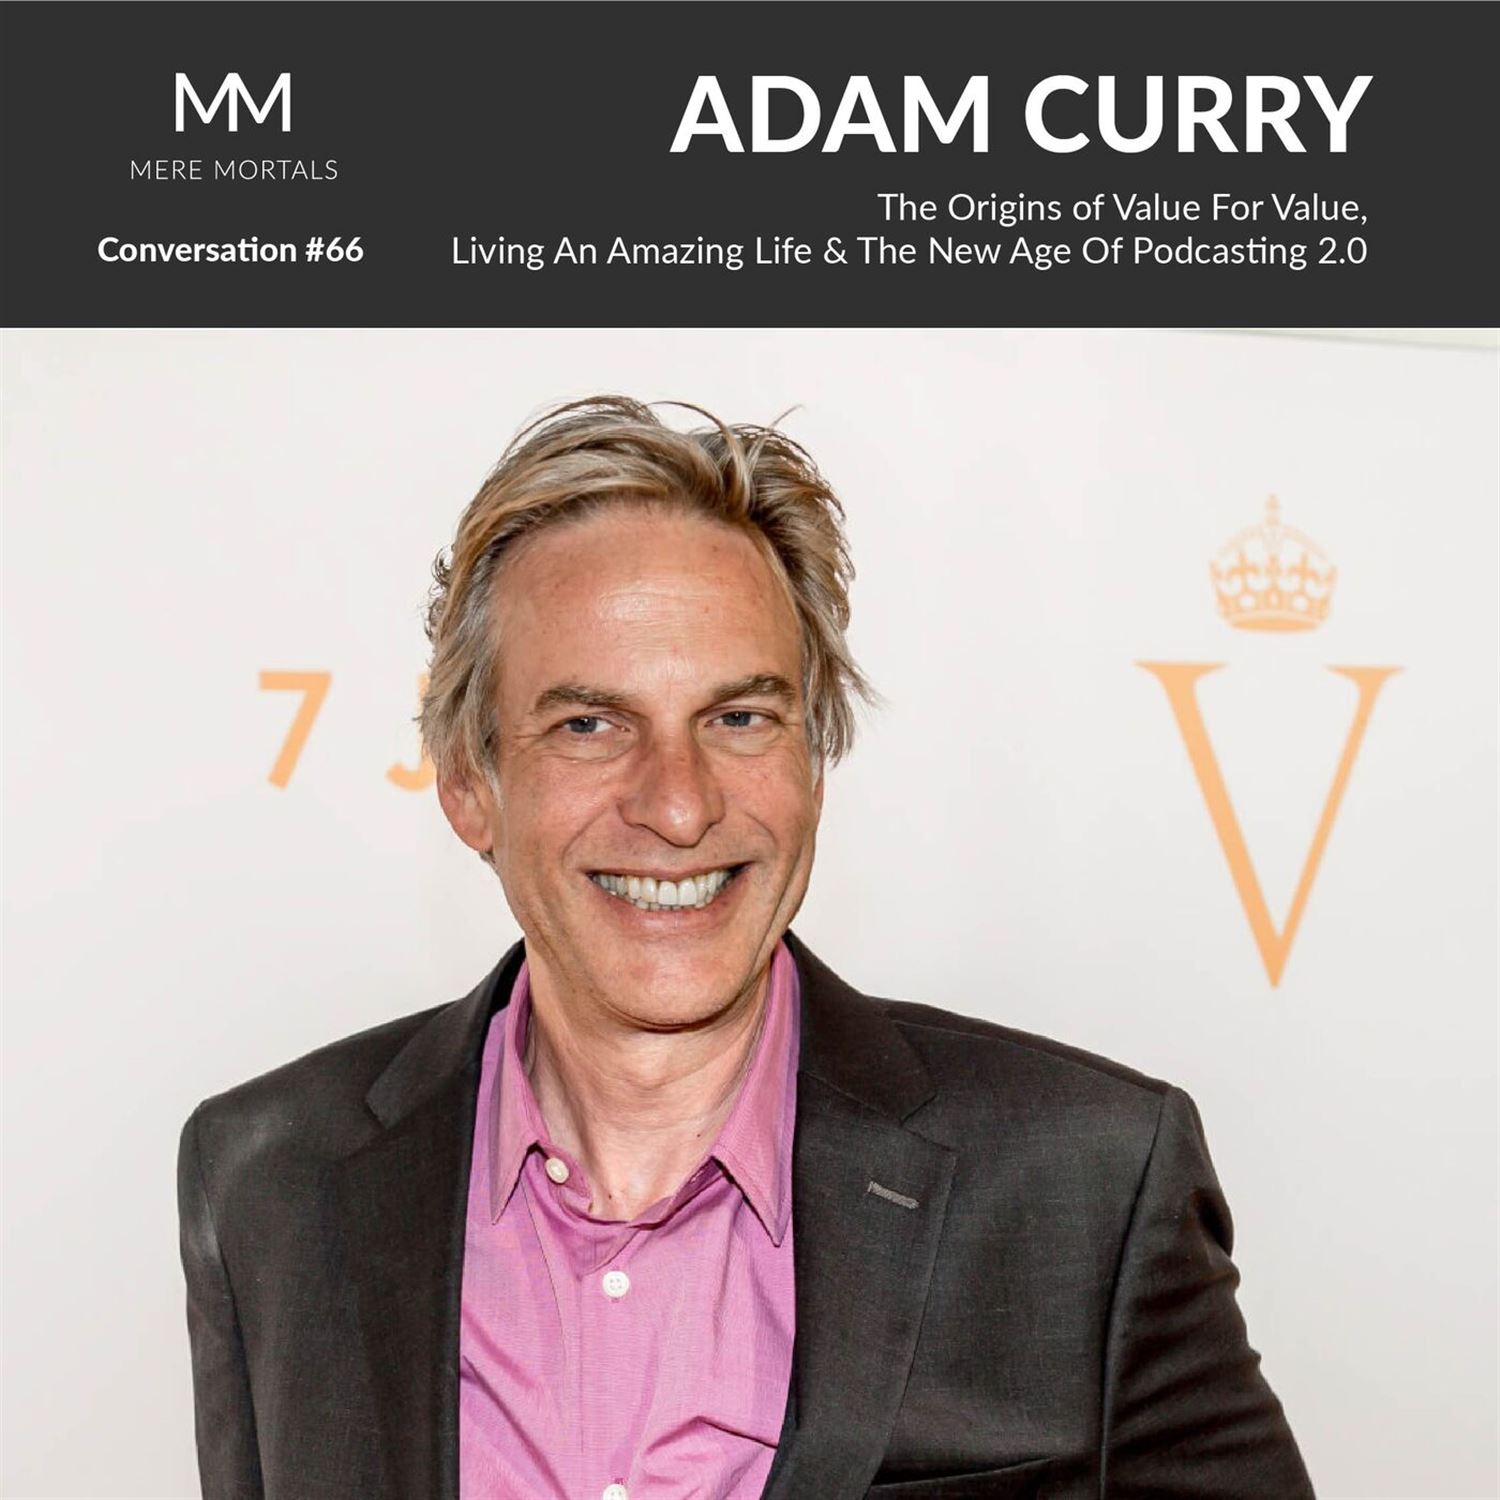 ADAM CURRY | The Origins Of Value For Value, Living An Amazing Life & The New Age Of Podcasting 2.0